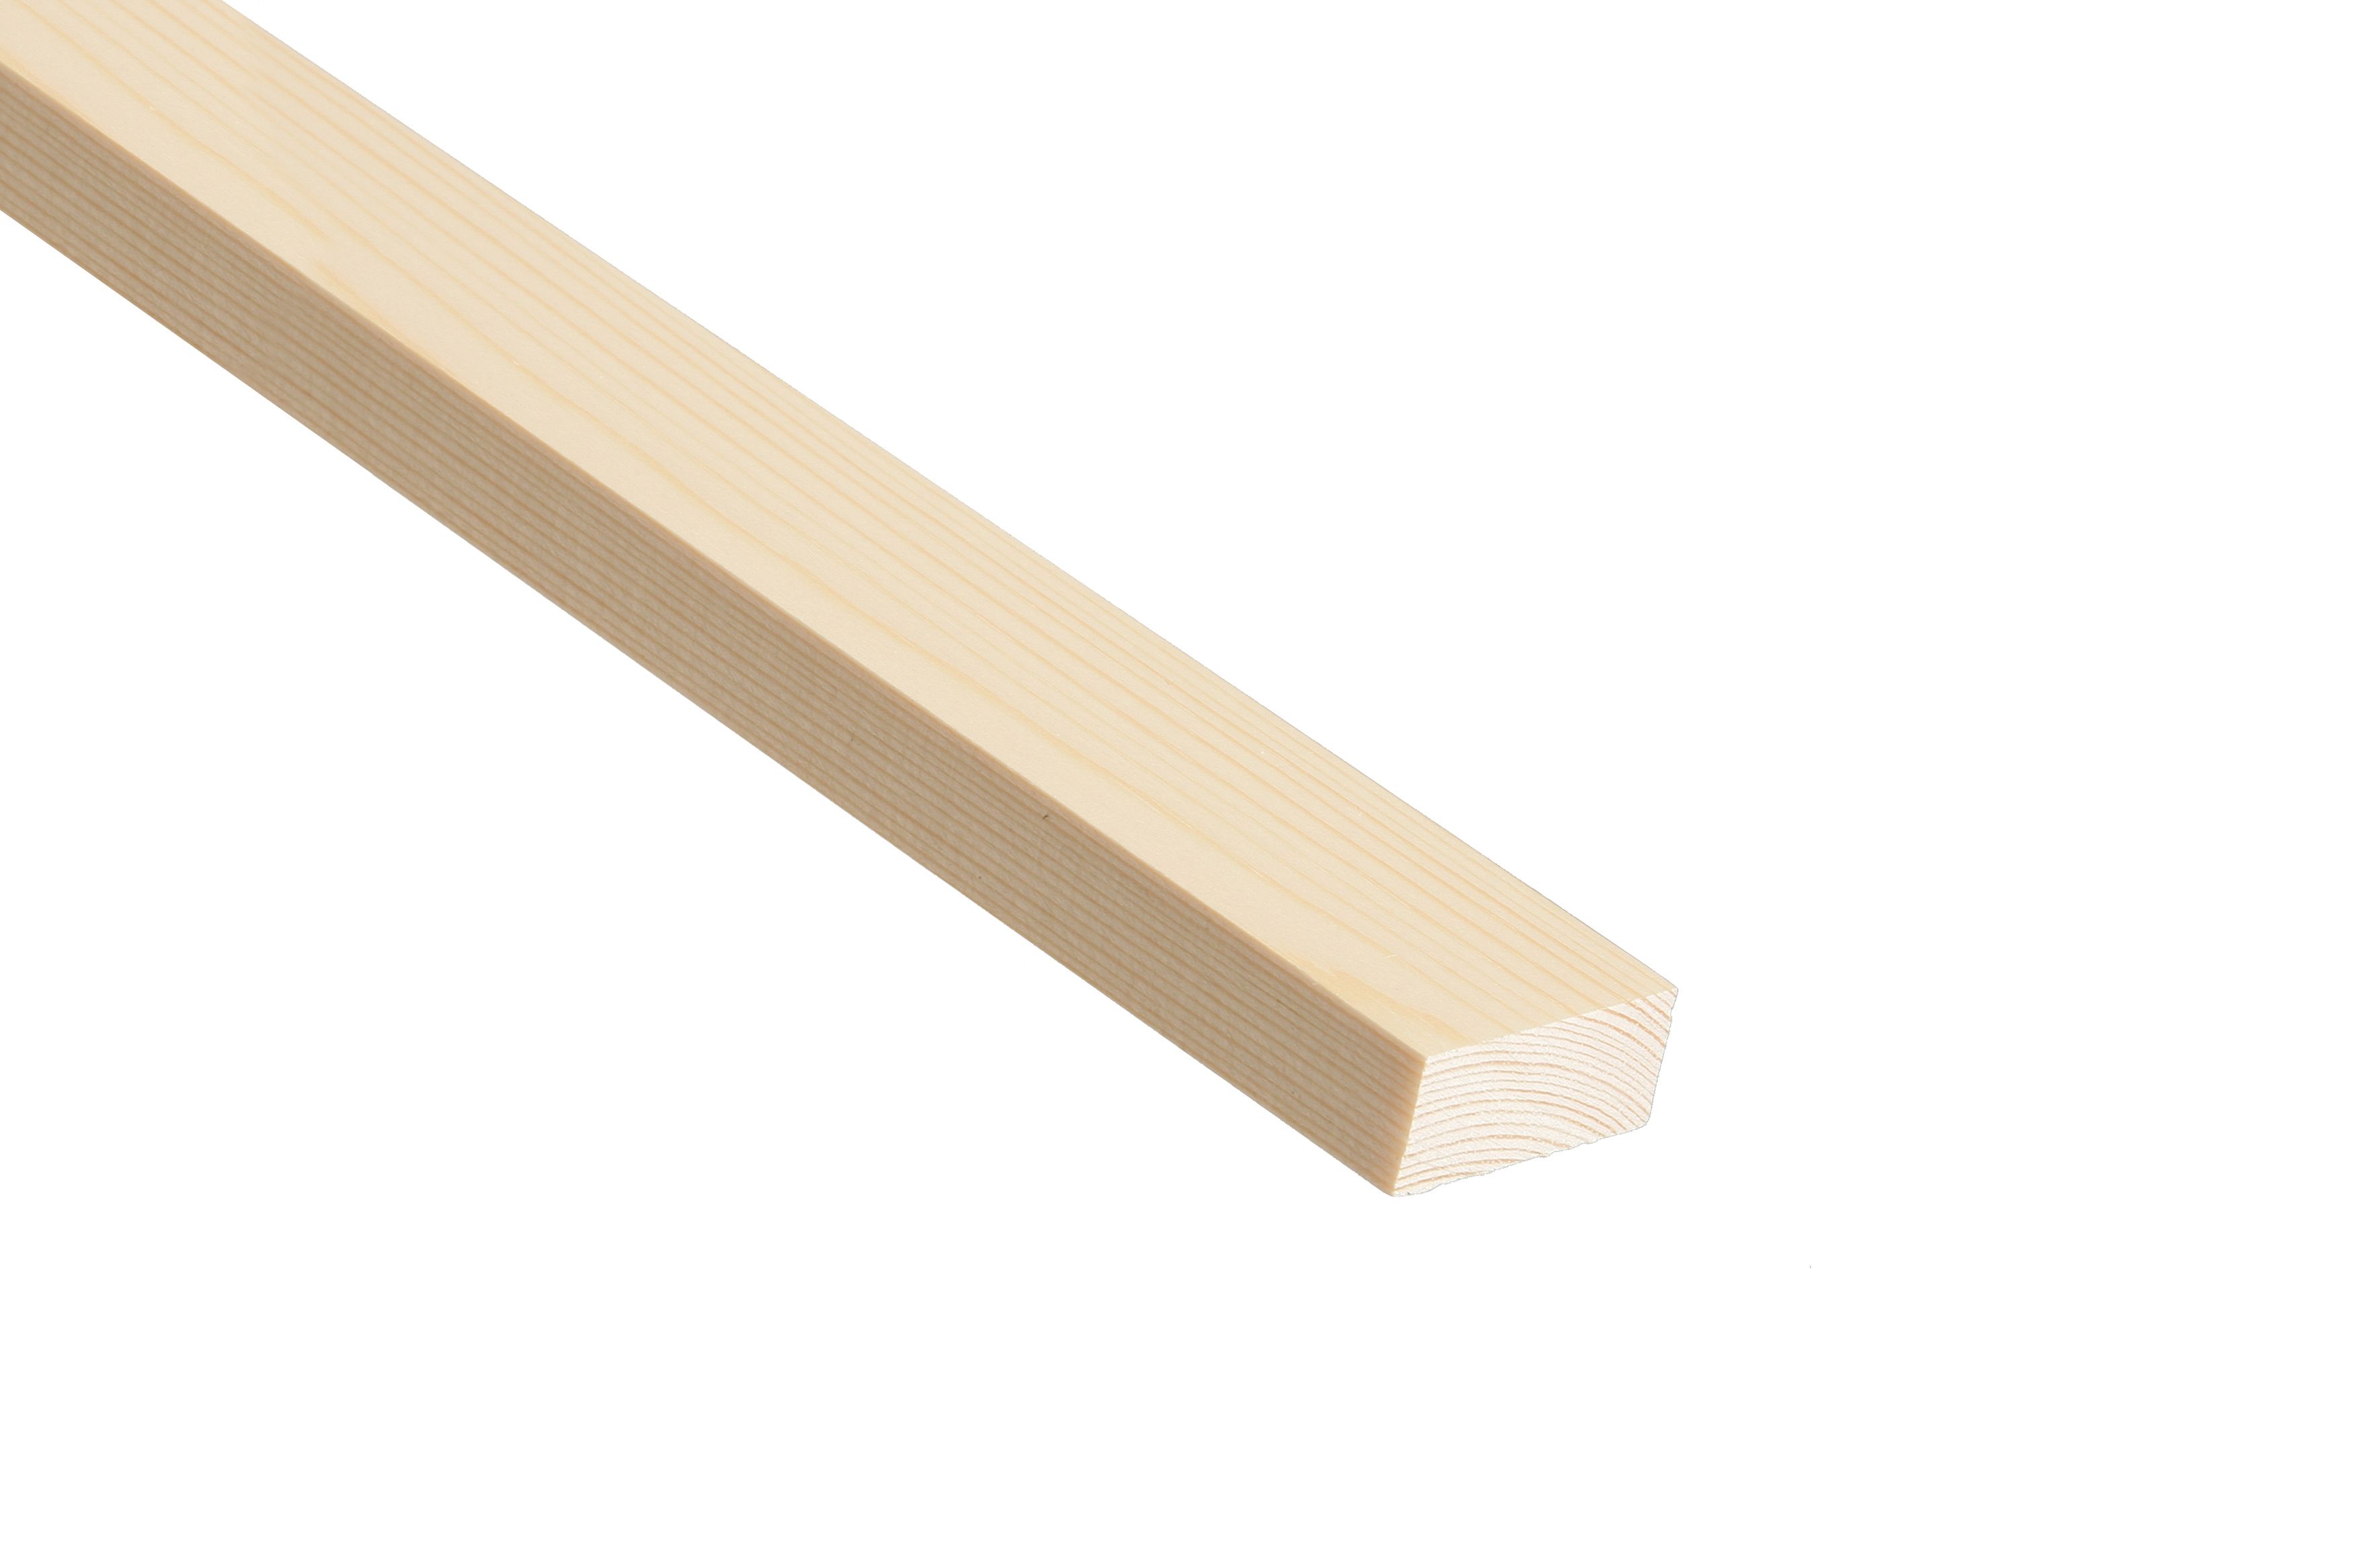 Image of Wickes Pine Stripwood Moulding (PSE) - 15 x 68 x 2400mm